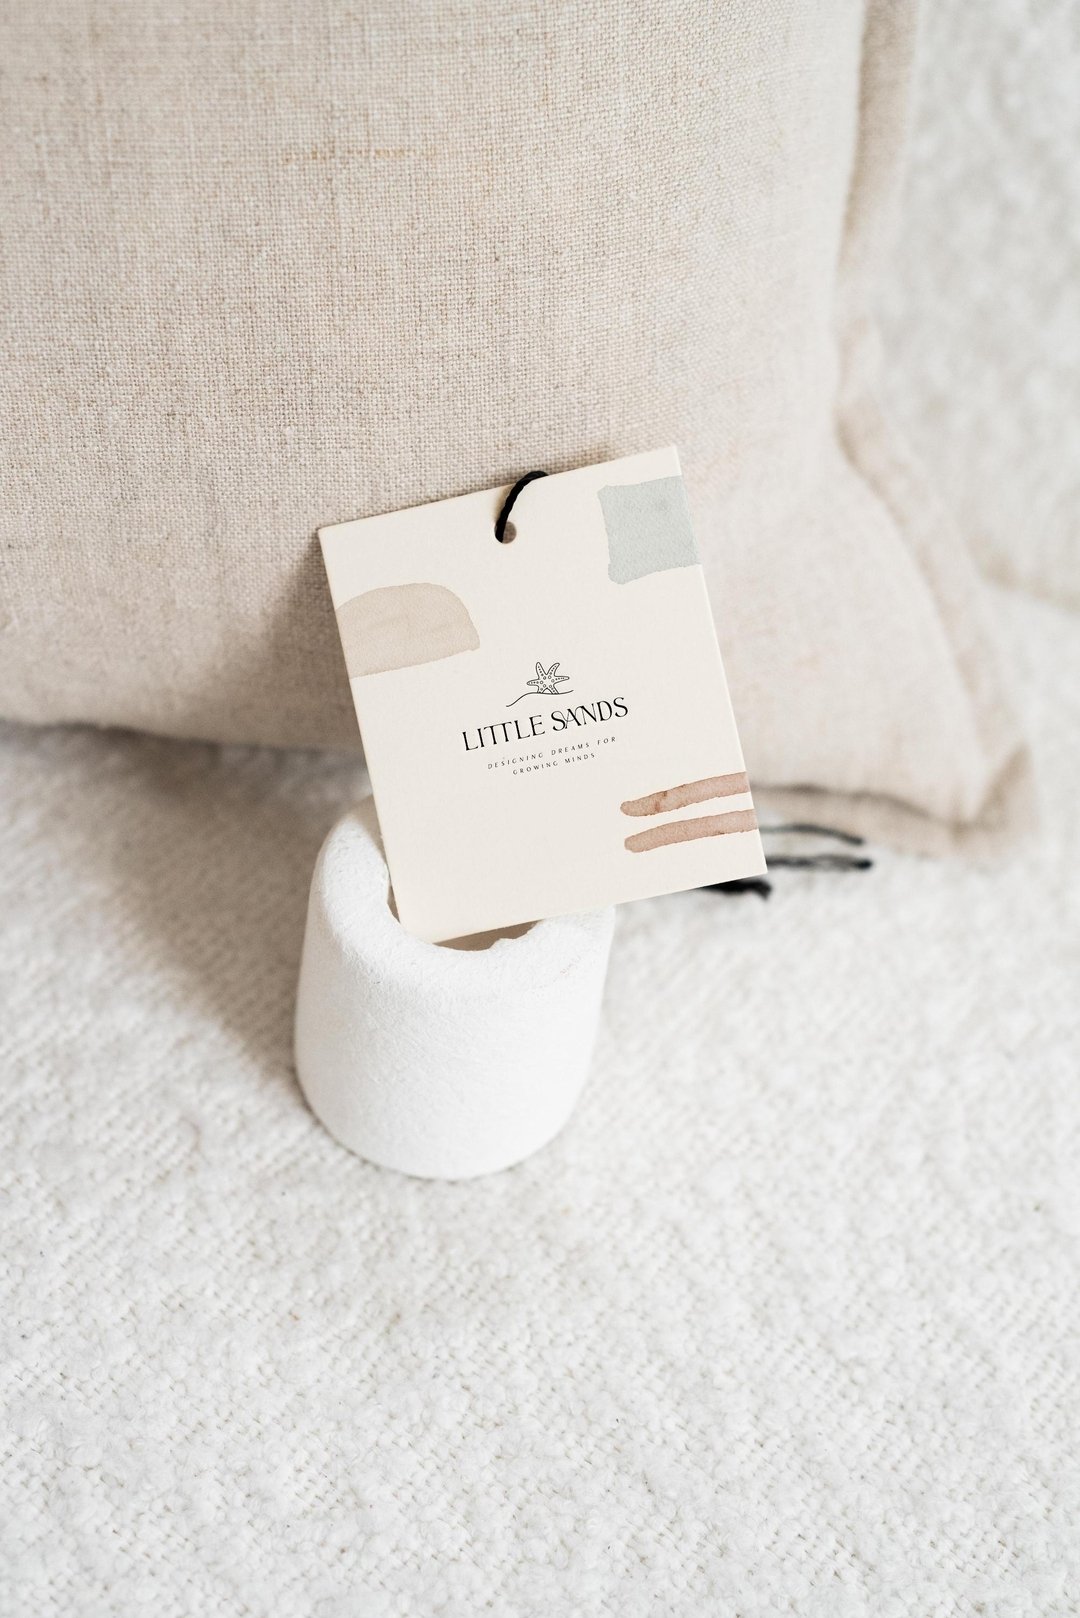 Here's a mini Brand Reveal that i just can't keep to myself any longer!! I am so in love with this stunning branding I completed recently for Little Sands and wanted to show you a little sneak peak. Its modern, its elegant and its a whole lot of coas